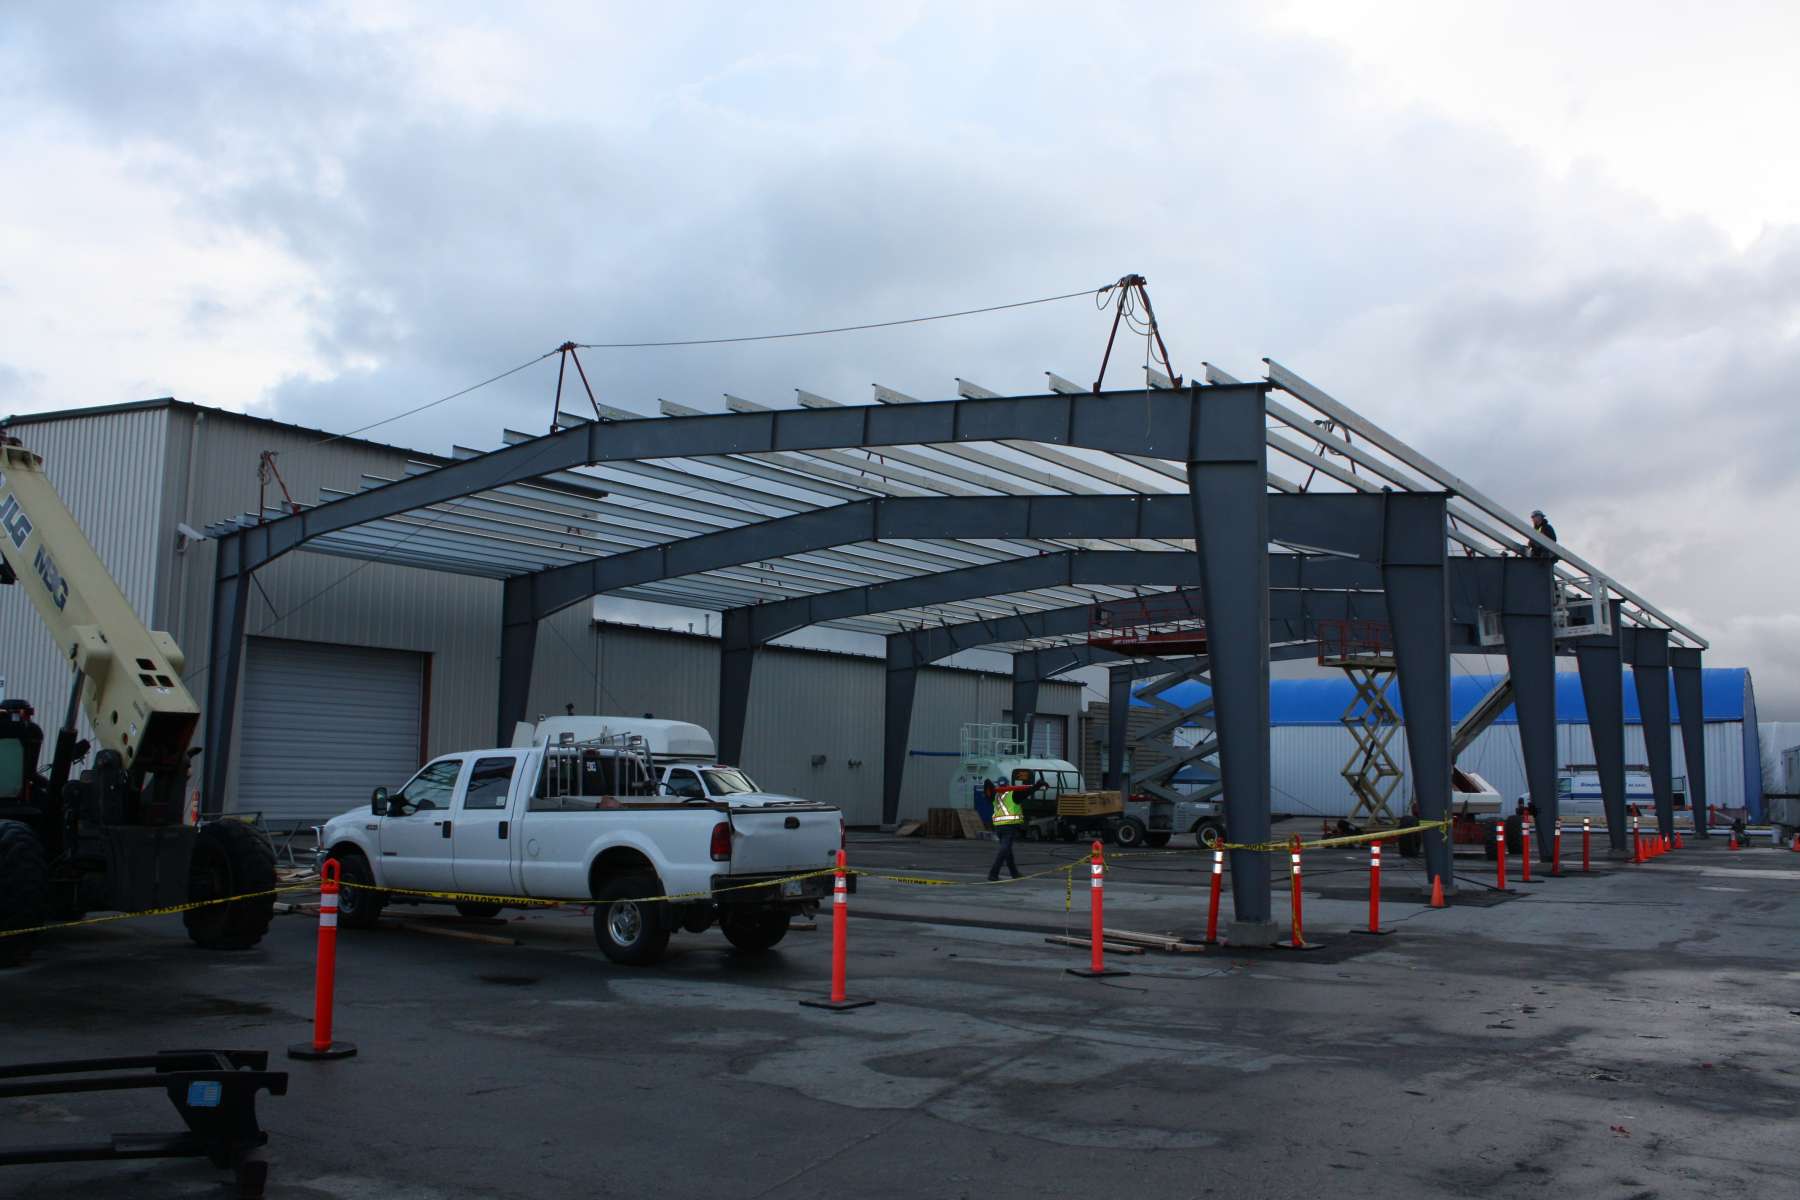 bc hydro receiving structures prefab steel buildings bc steel buildings bc prefabricated metal buildings canada